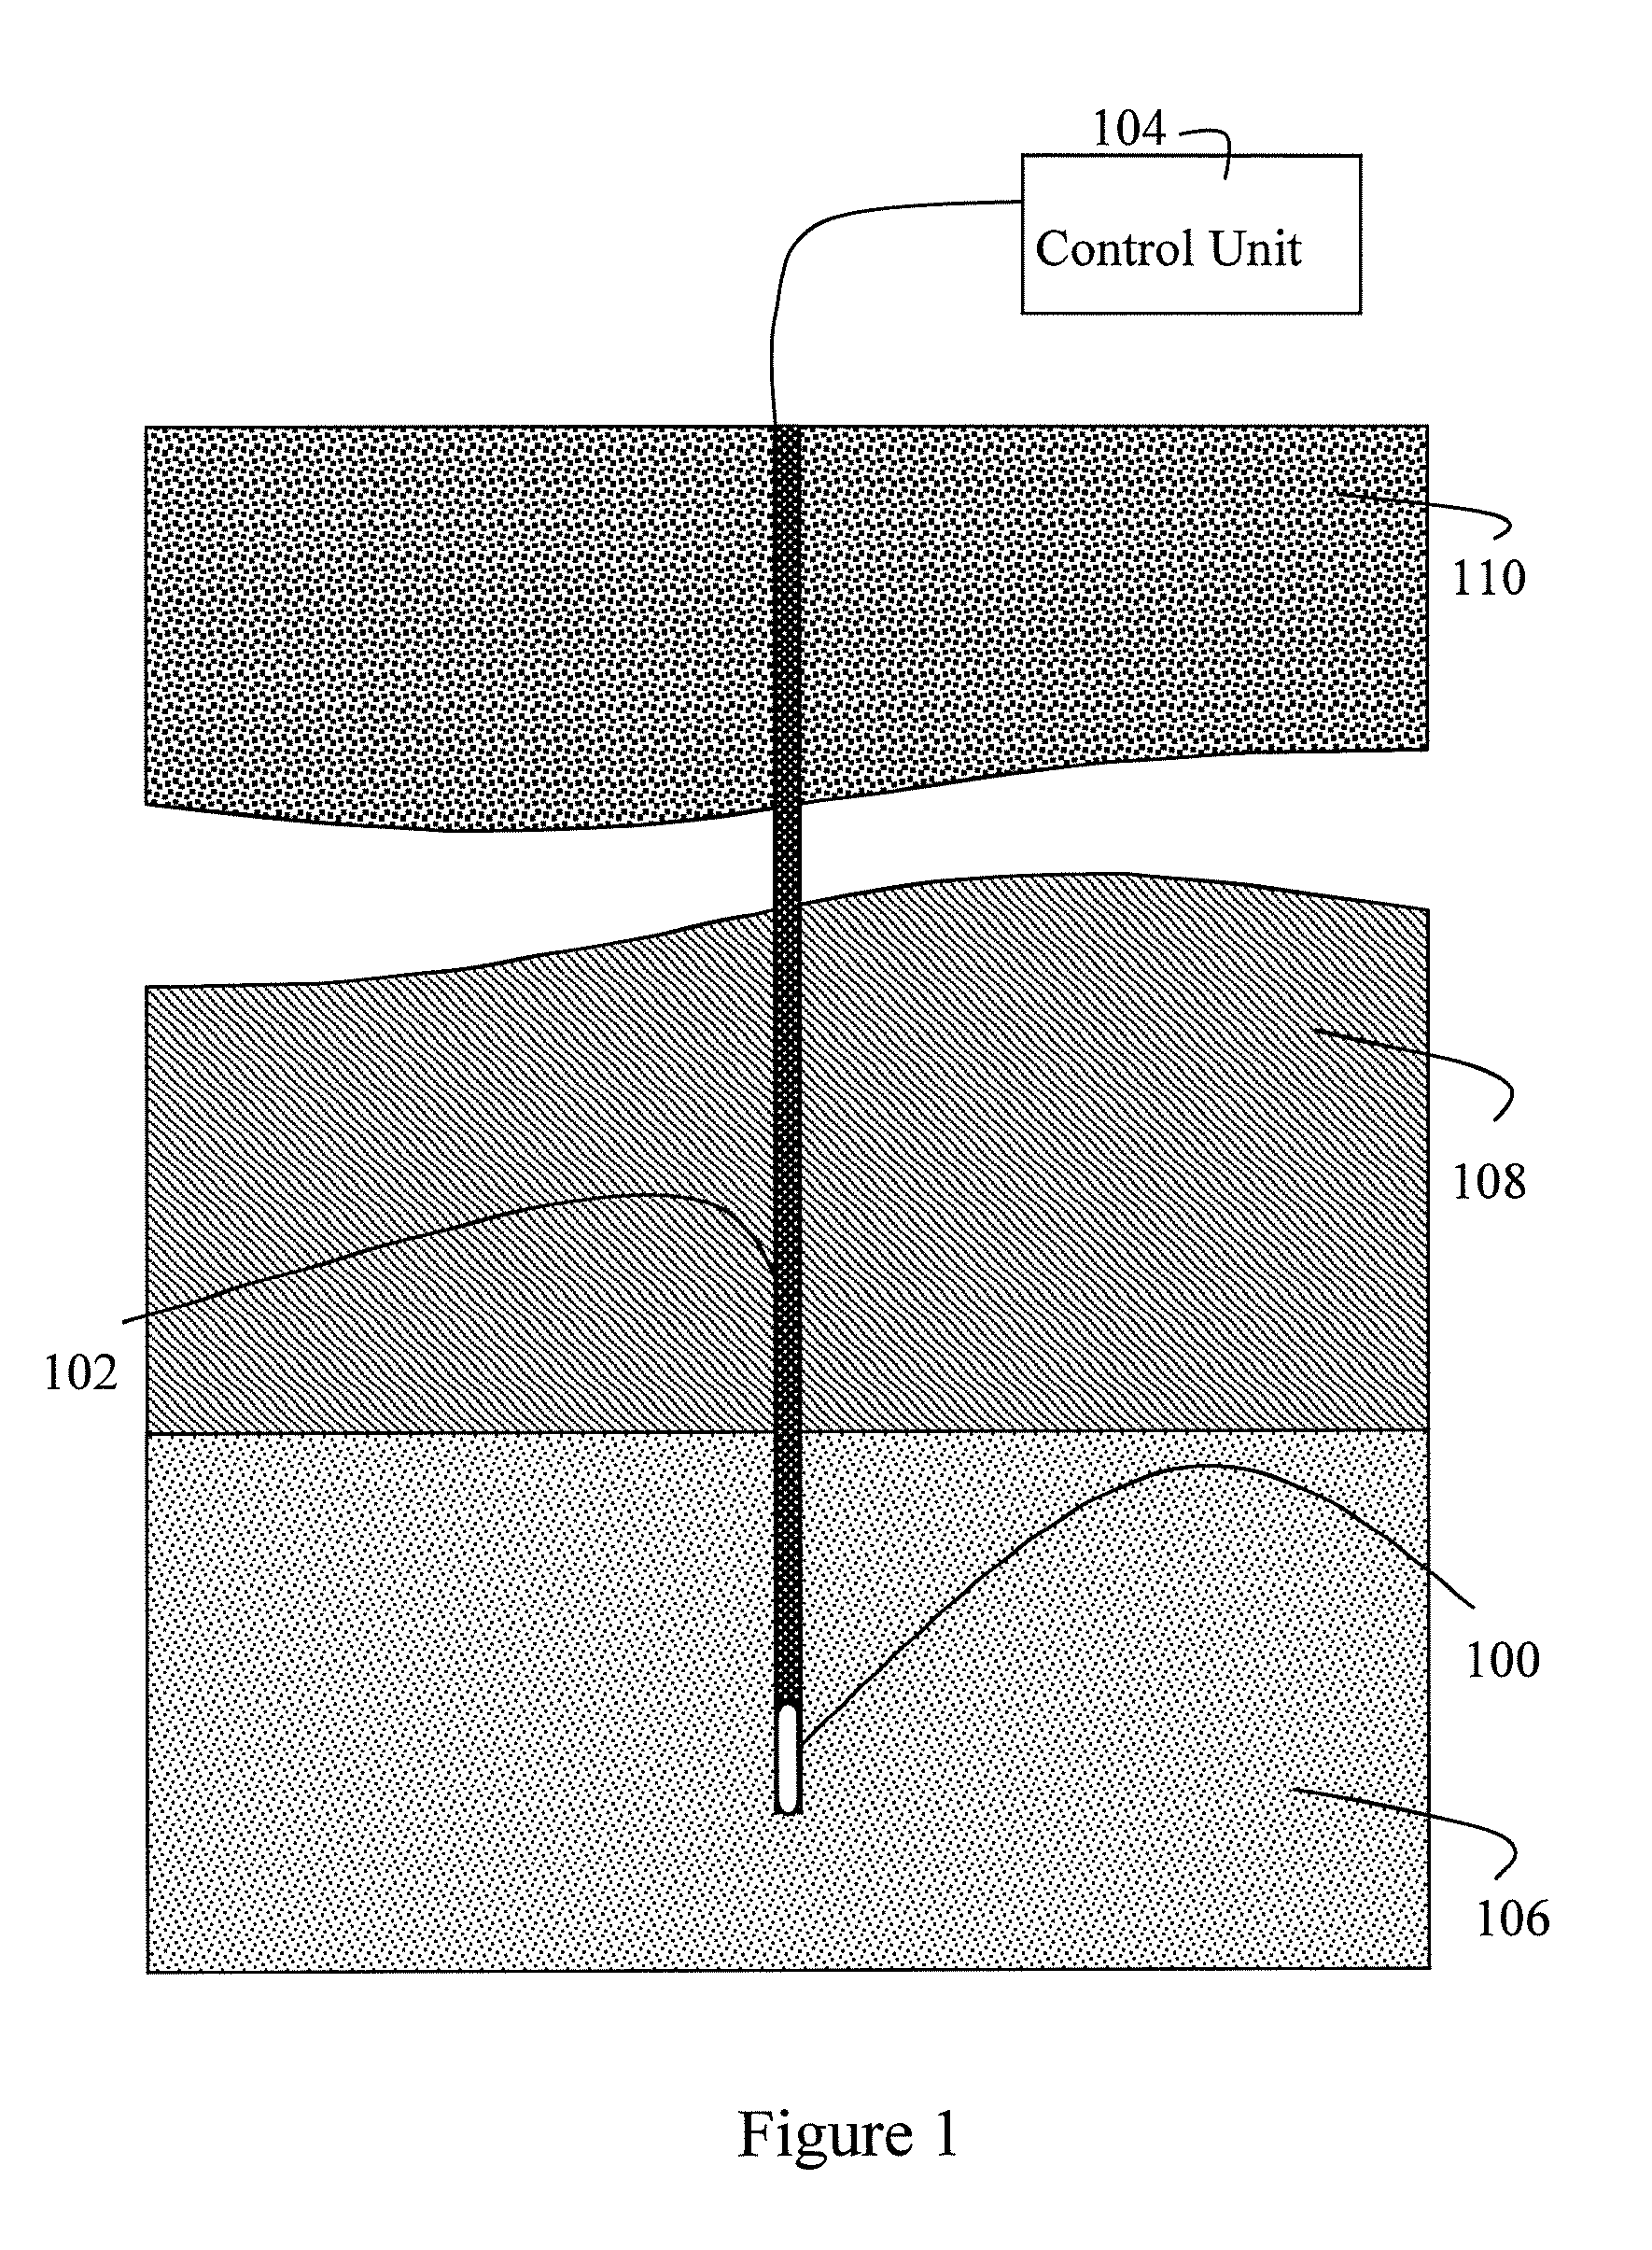 Detecting gas compounds for downhole fluid analysis